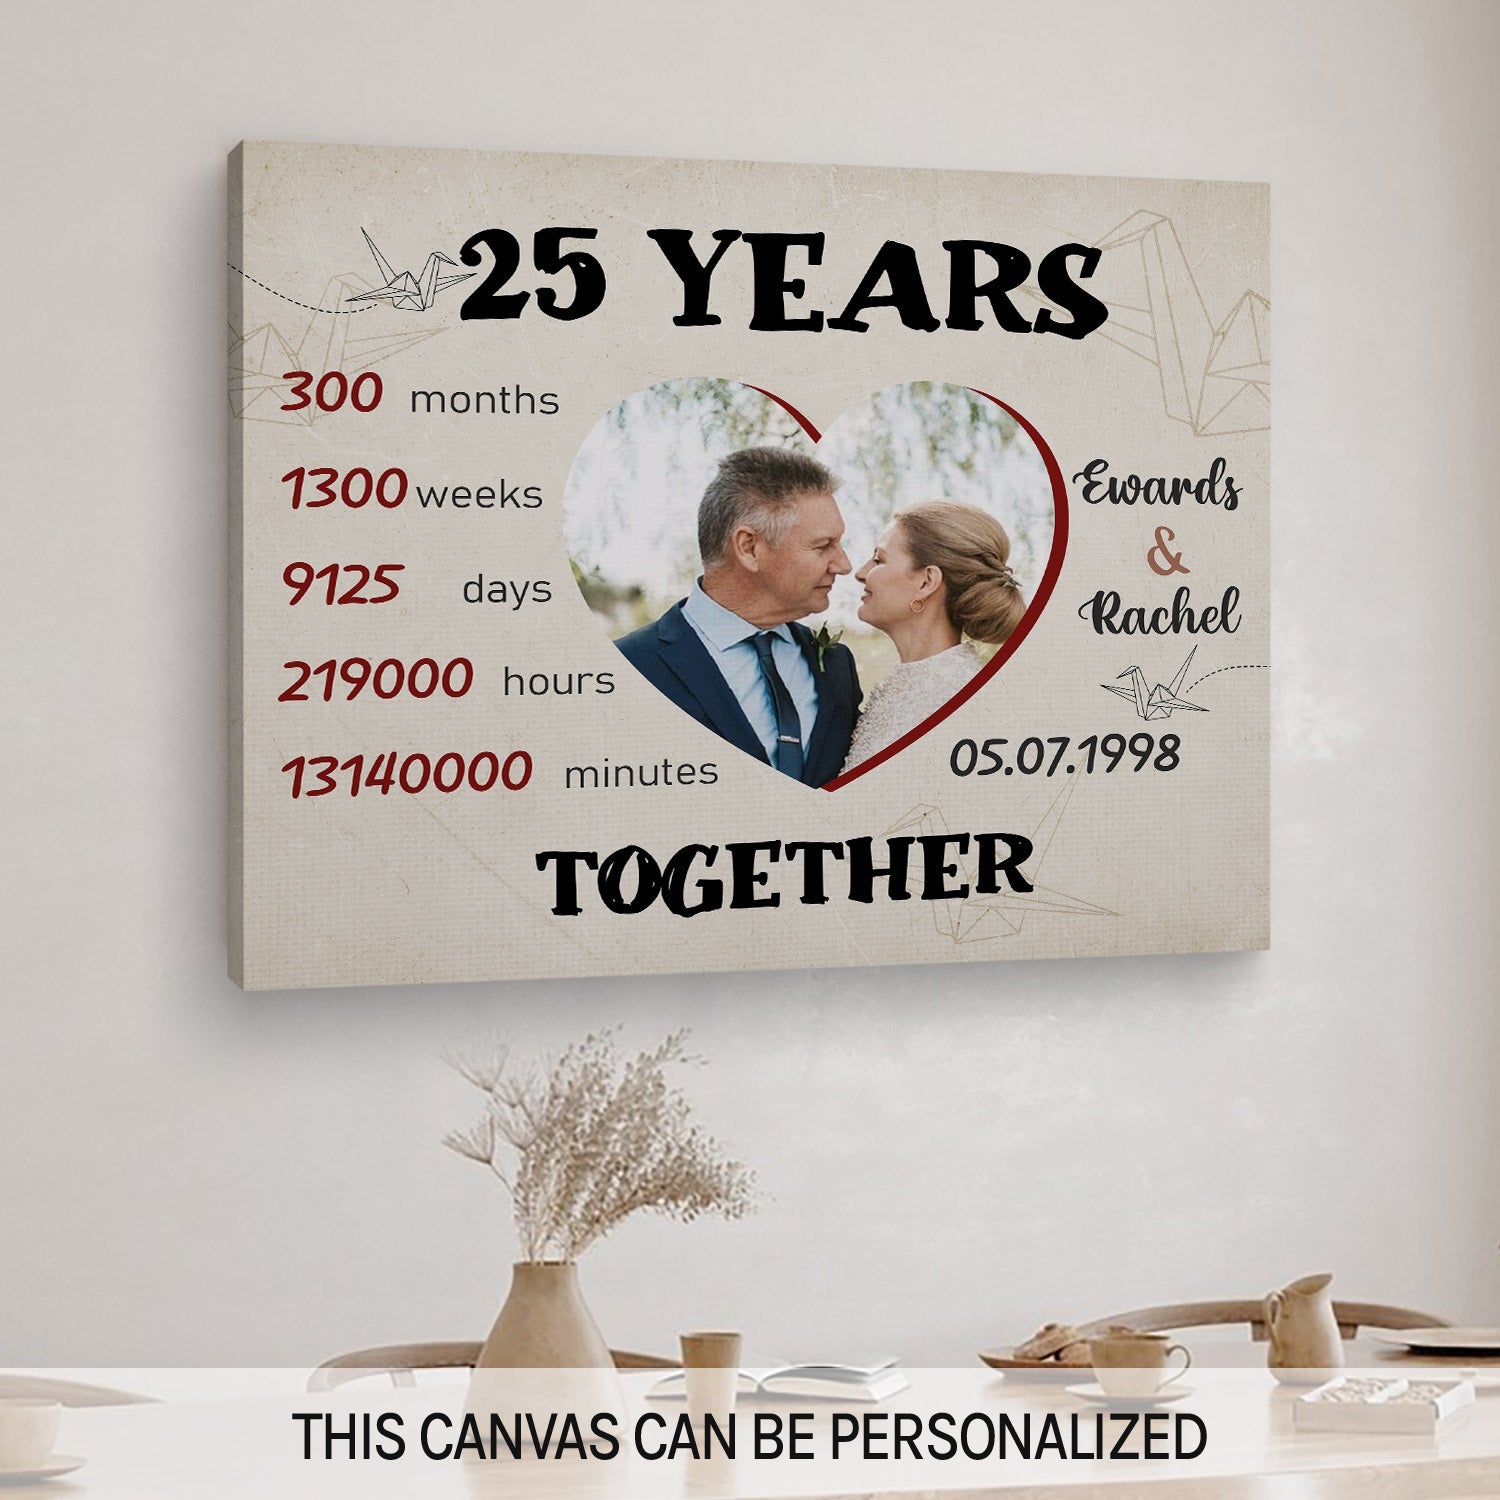 GFTBX Customized Engraved Wooden Photo Plaque for '25th Wedding Anniversary'  Gift For Parents (9 x 7 inches, Brown), Tabletop, Rectangular : Amazon.in:  Home & Kitchen